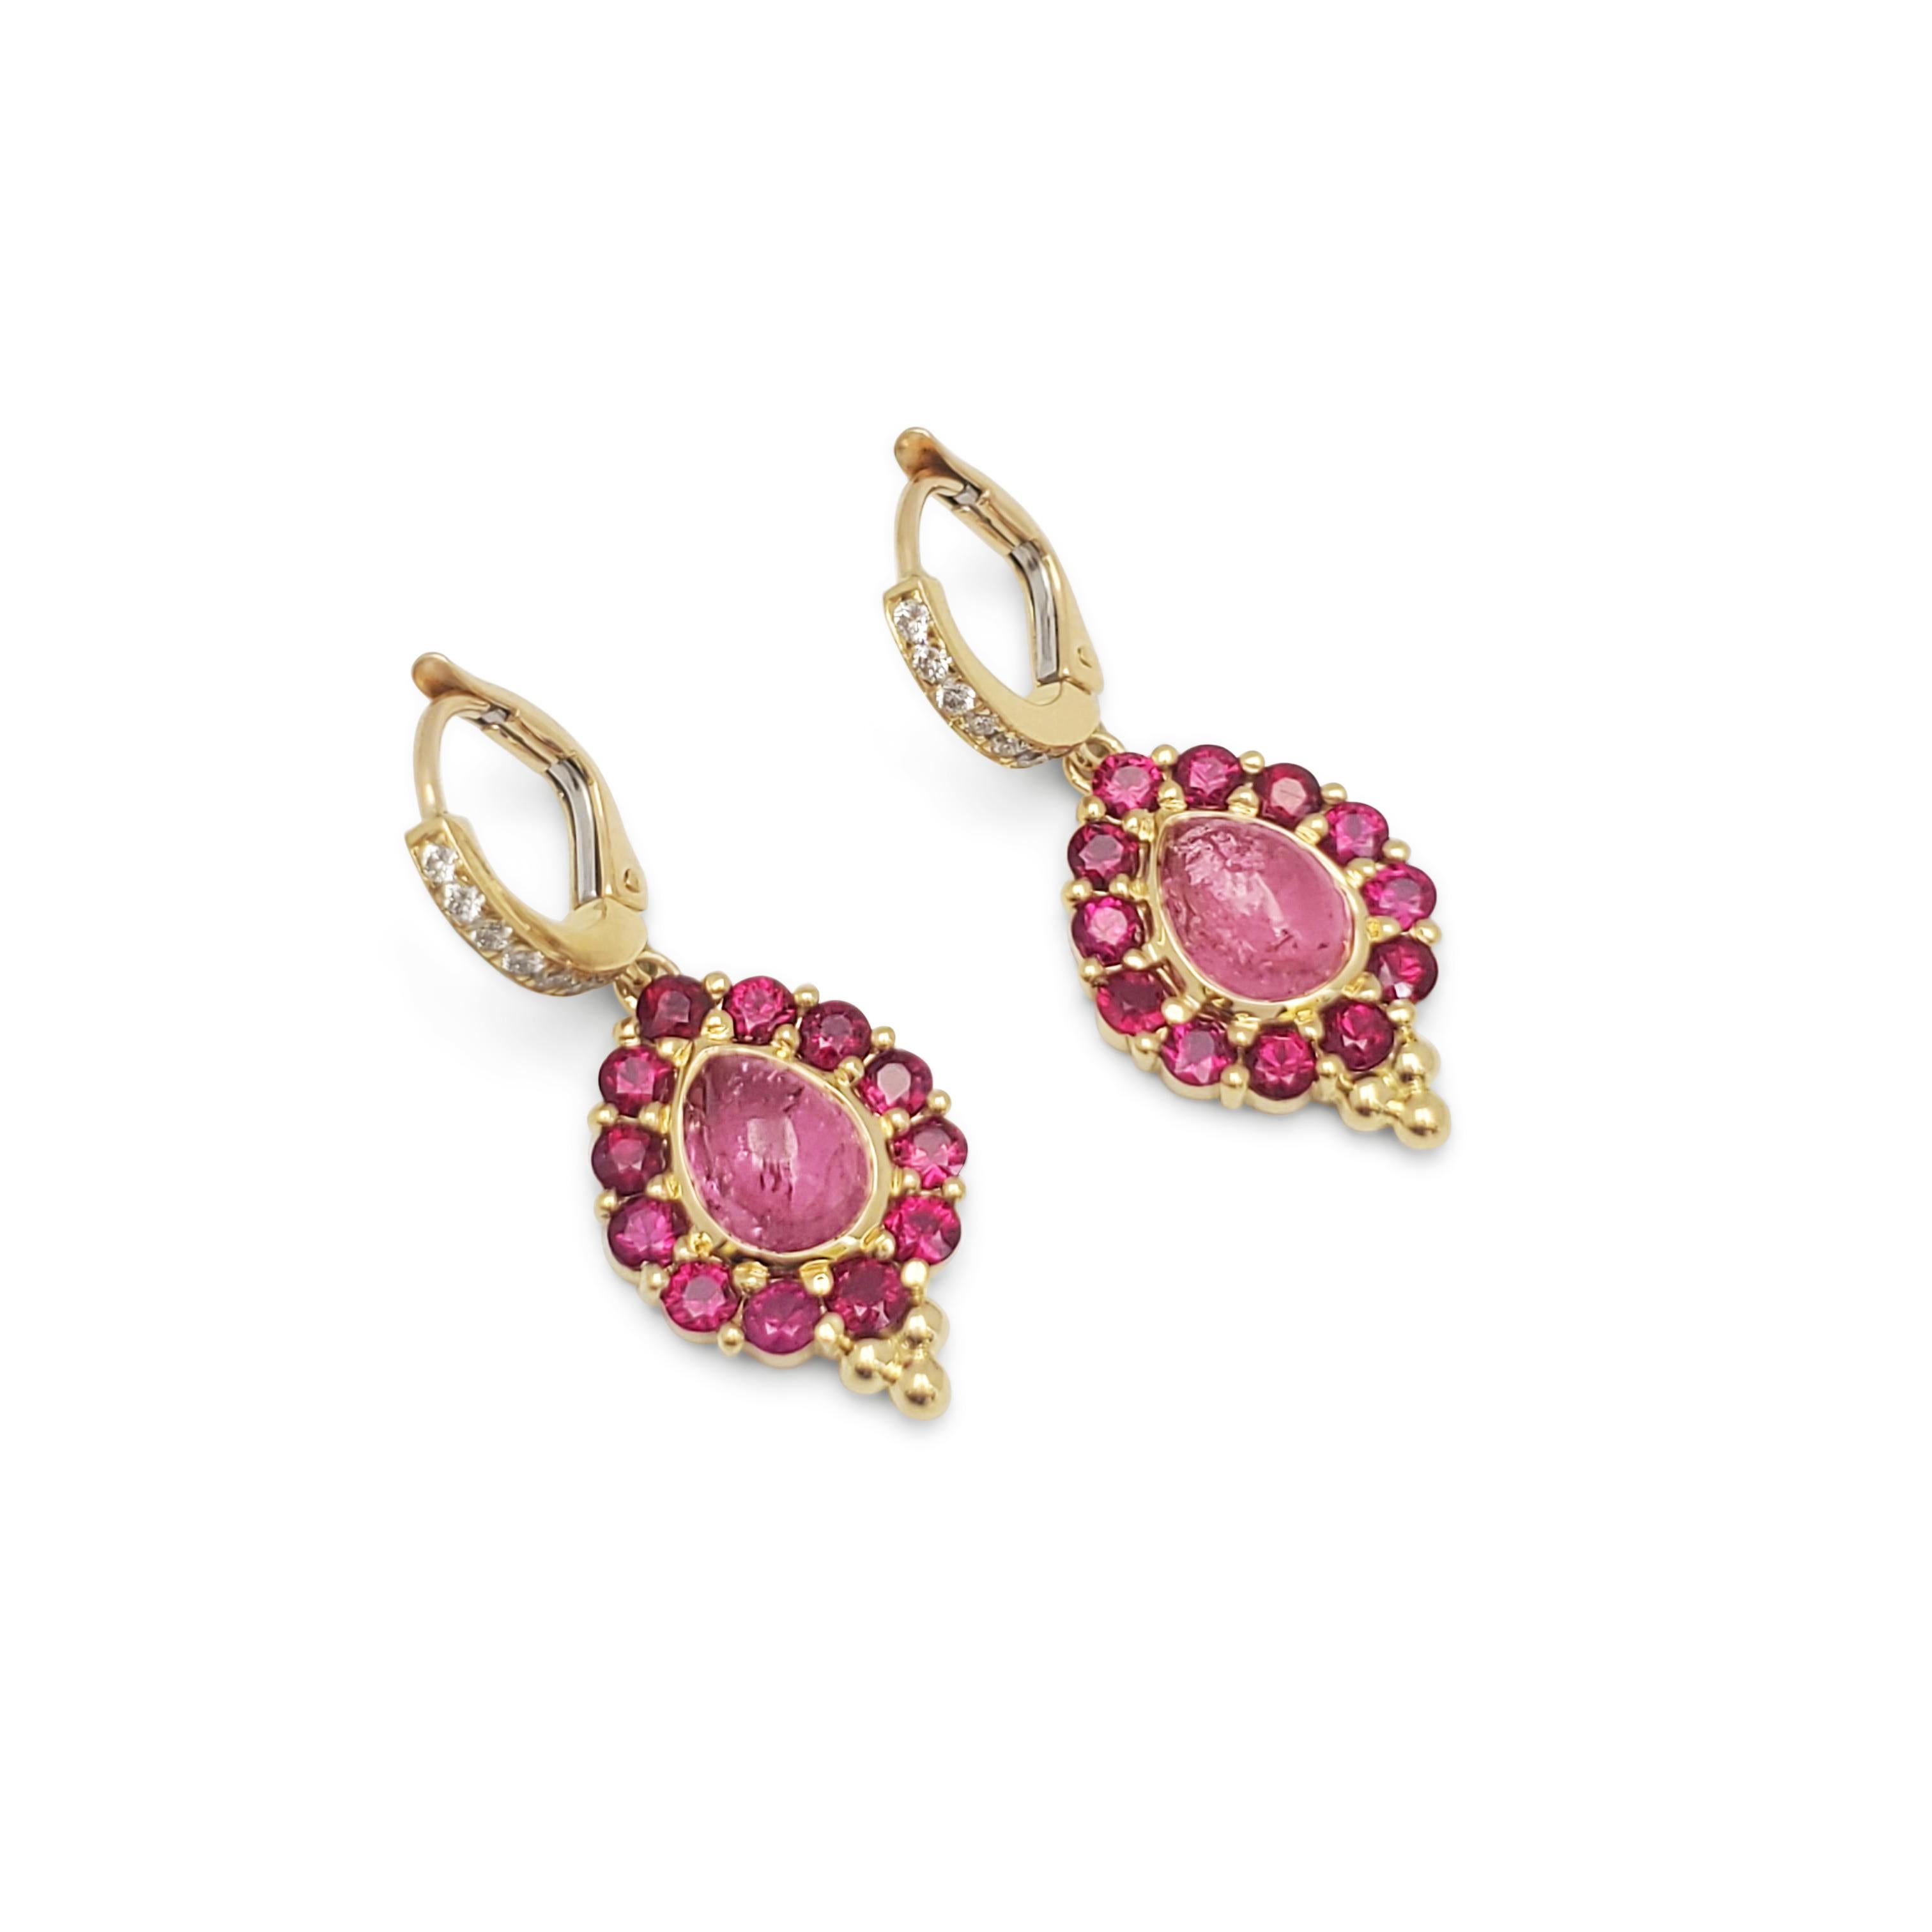 Authentic Temple St. Clair 'Dreamcatcher' earrings from the Color Theory collection.  Crafted in 18 karat yellow gold, the design pays homage to the color pink.  Each earring is set with a hot pink cabochon tourmaline (approximately 3 carats for the